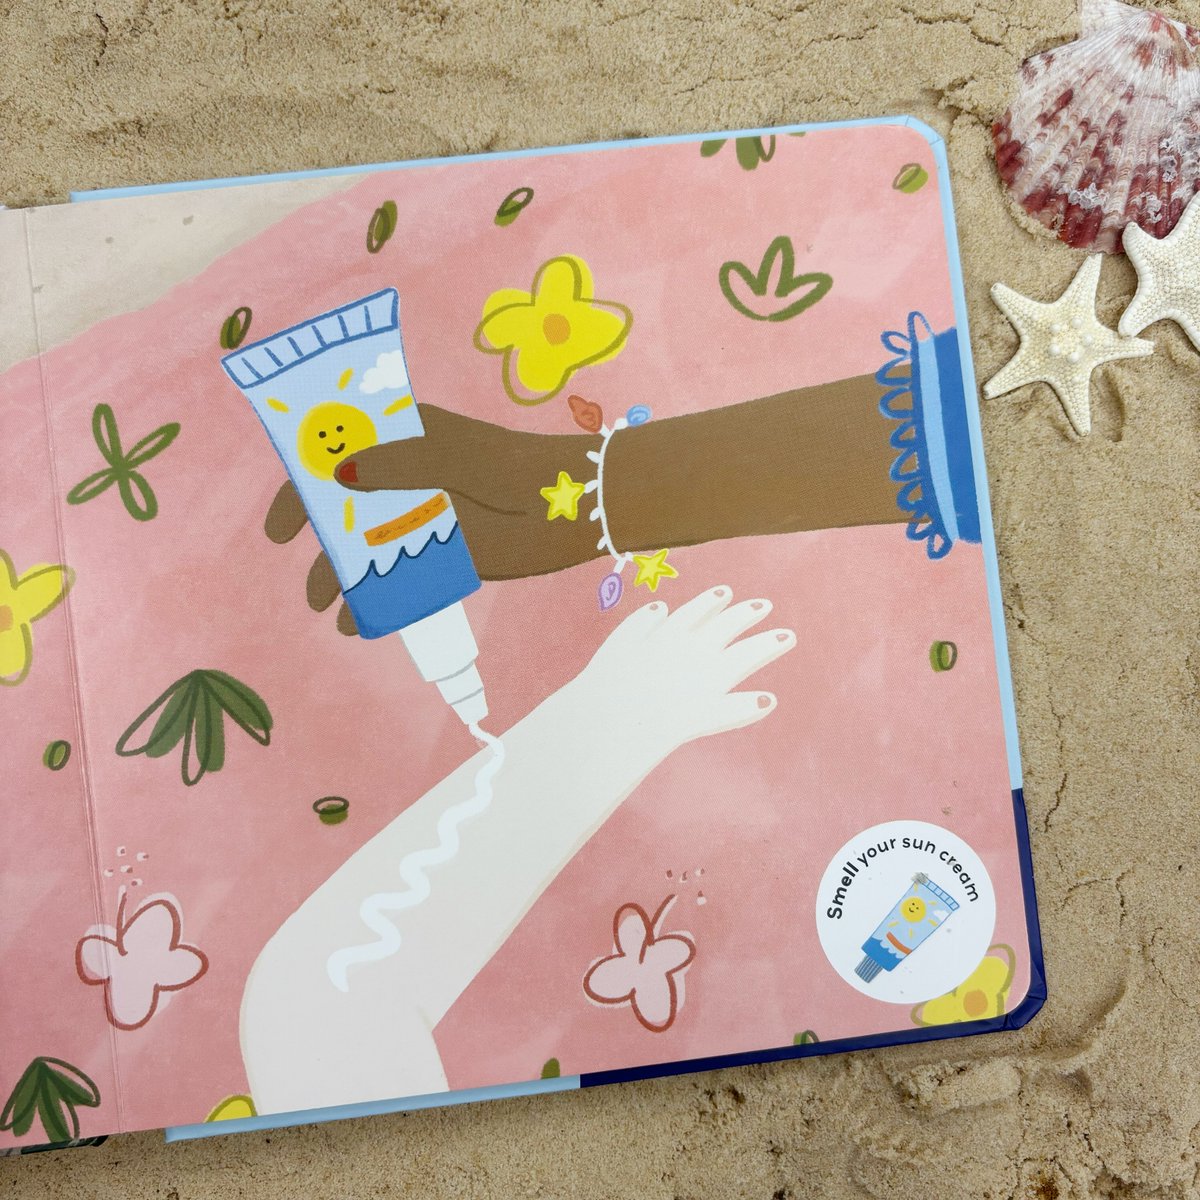 The weather’s getting warmer and we’ll soon be heading to the seaside for A Day at the Beach!

Keep your eyes peeled as more information (including pre-order info) will be coming soon!

#sensorystories #PMLD #everycherrypublishing